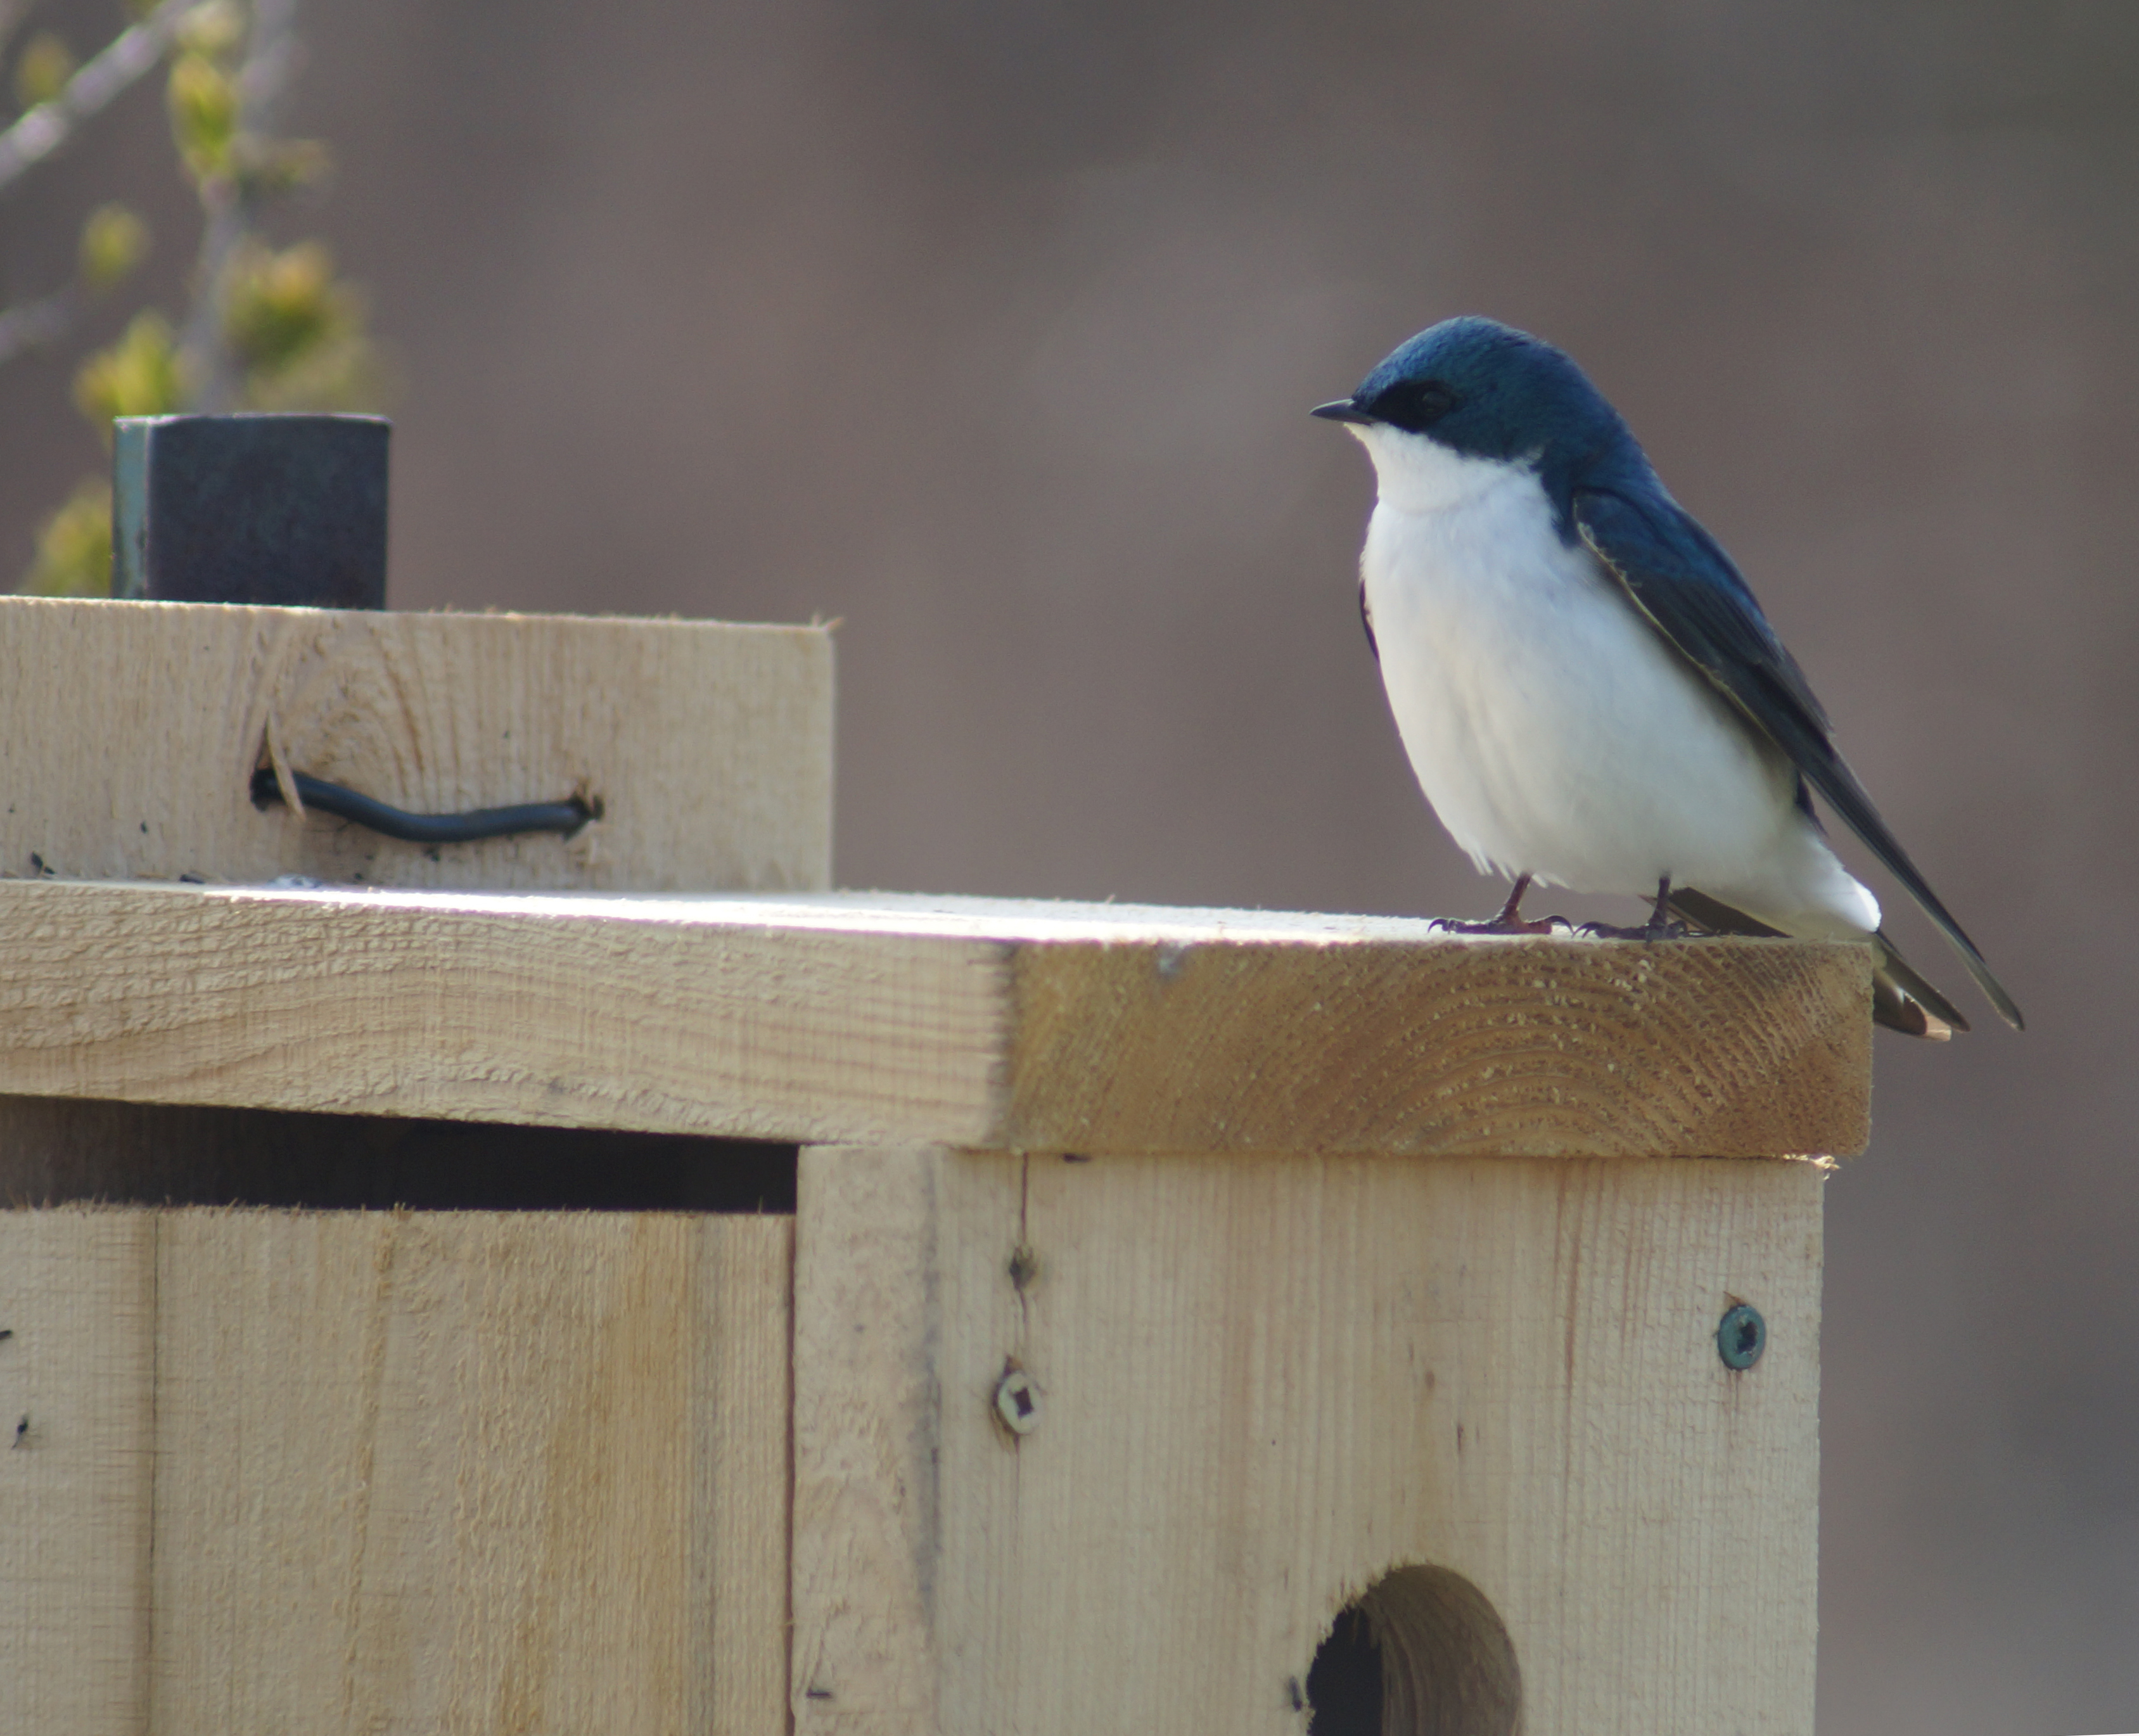 Tree Swallow at Colonel Same Smith Park, 2013. Photo by Miriam Garfinkle.